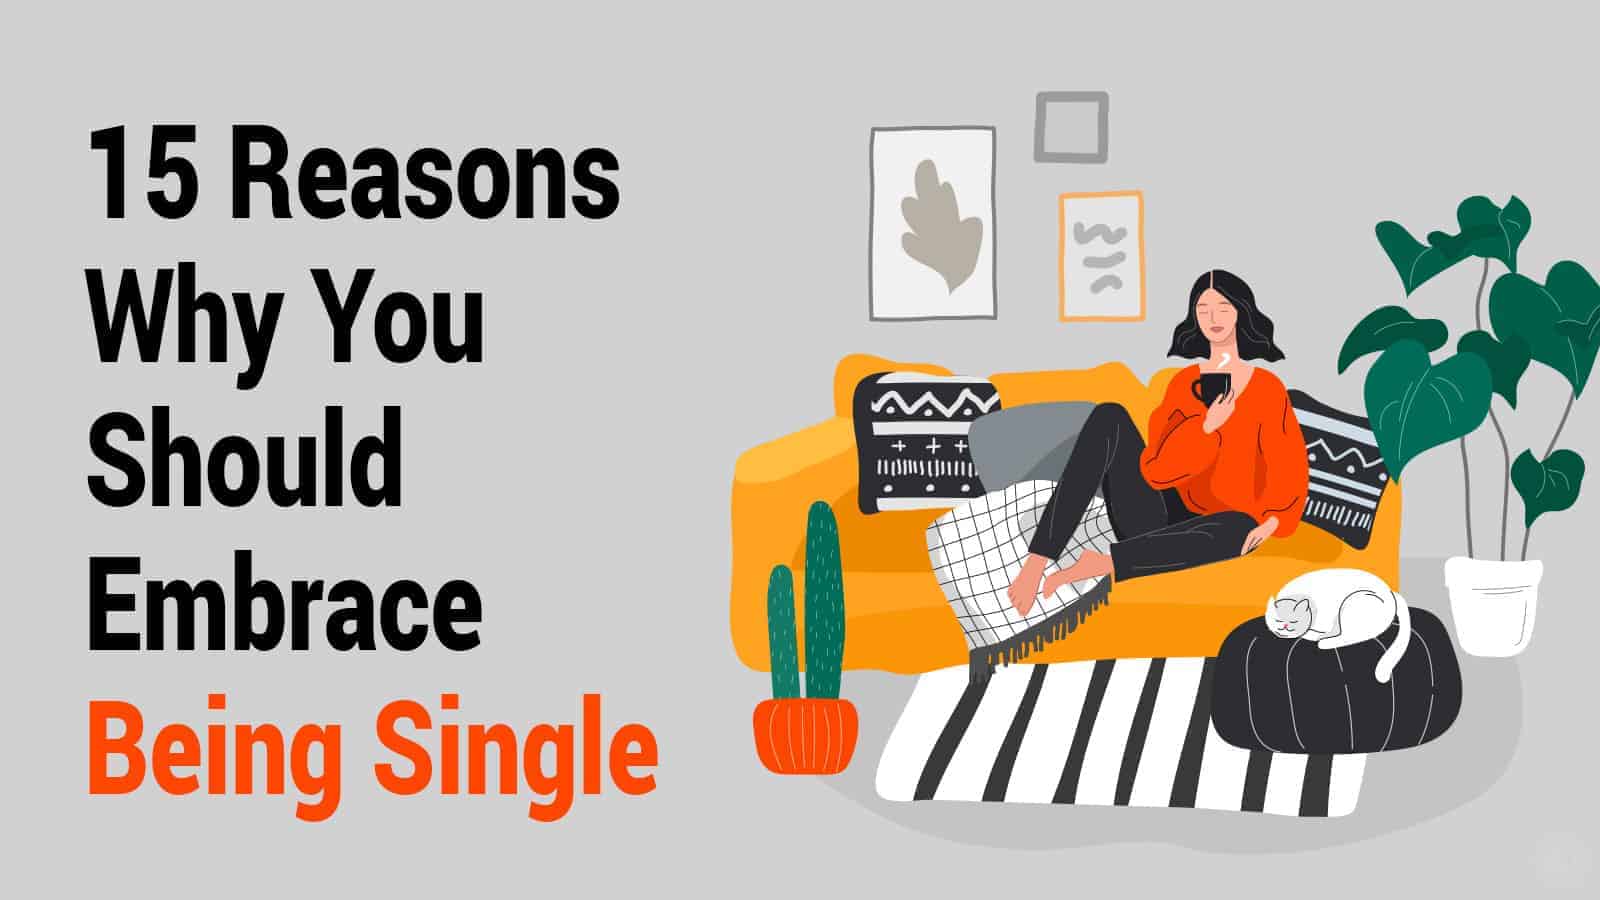 15 Reasons Why You Should Embrace Being Single